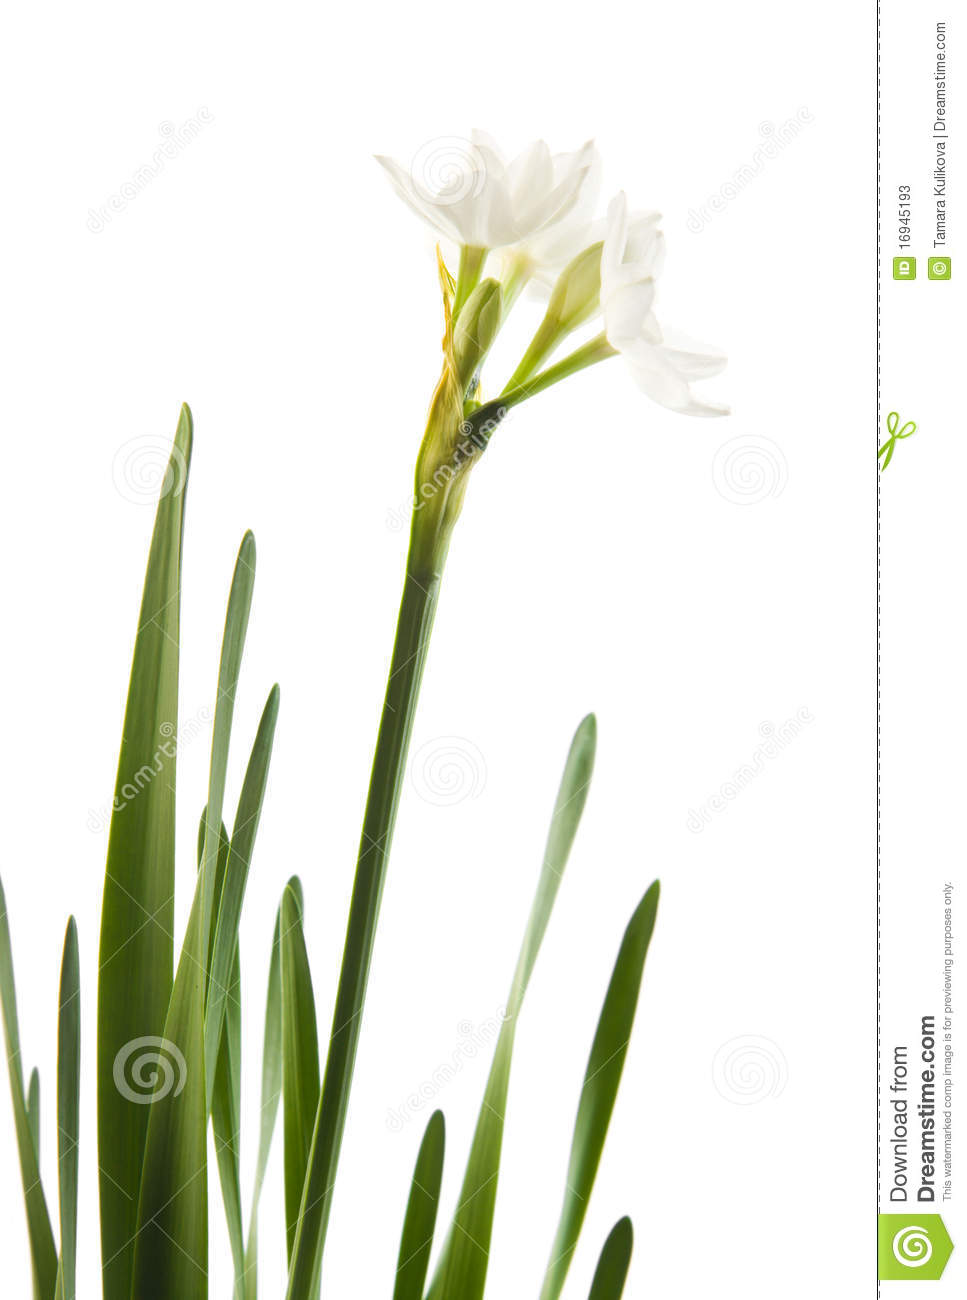 Paperwhite Narcissus clipart #5, Download drawings